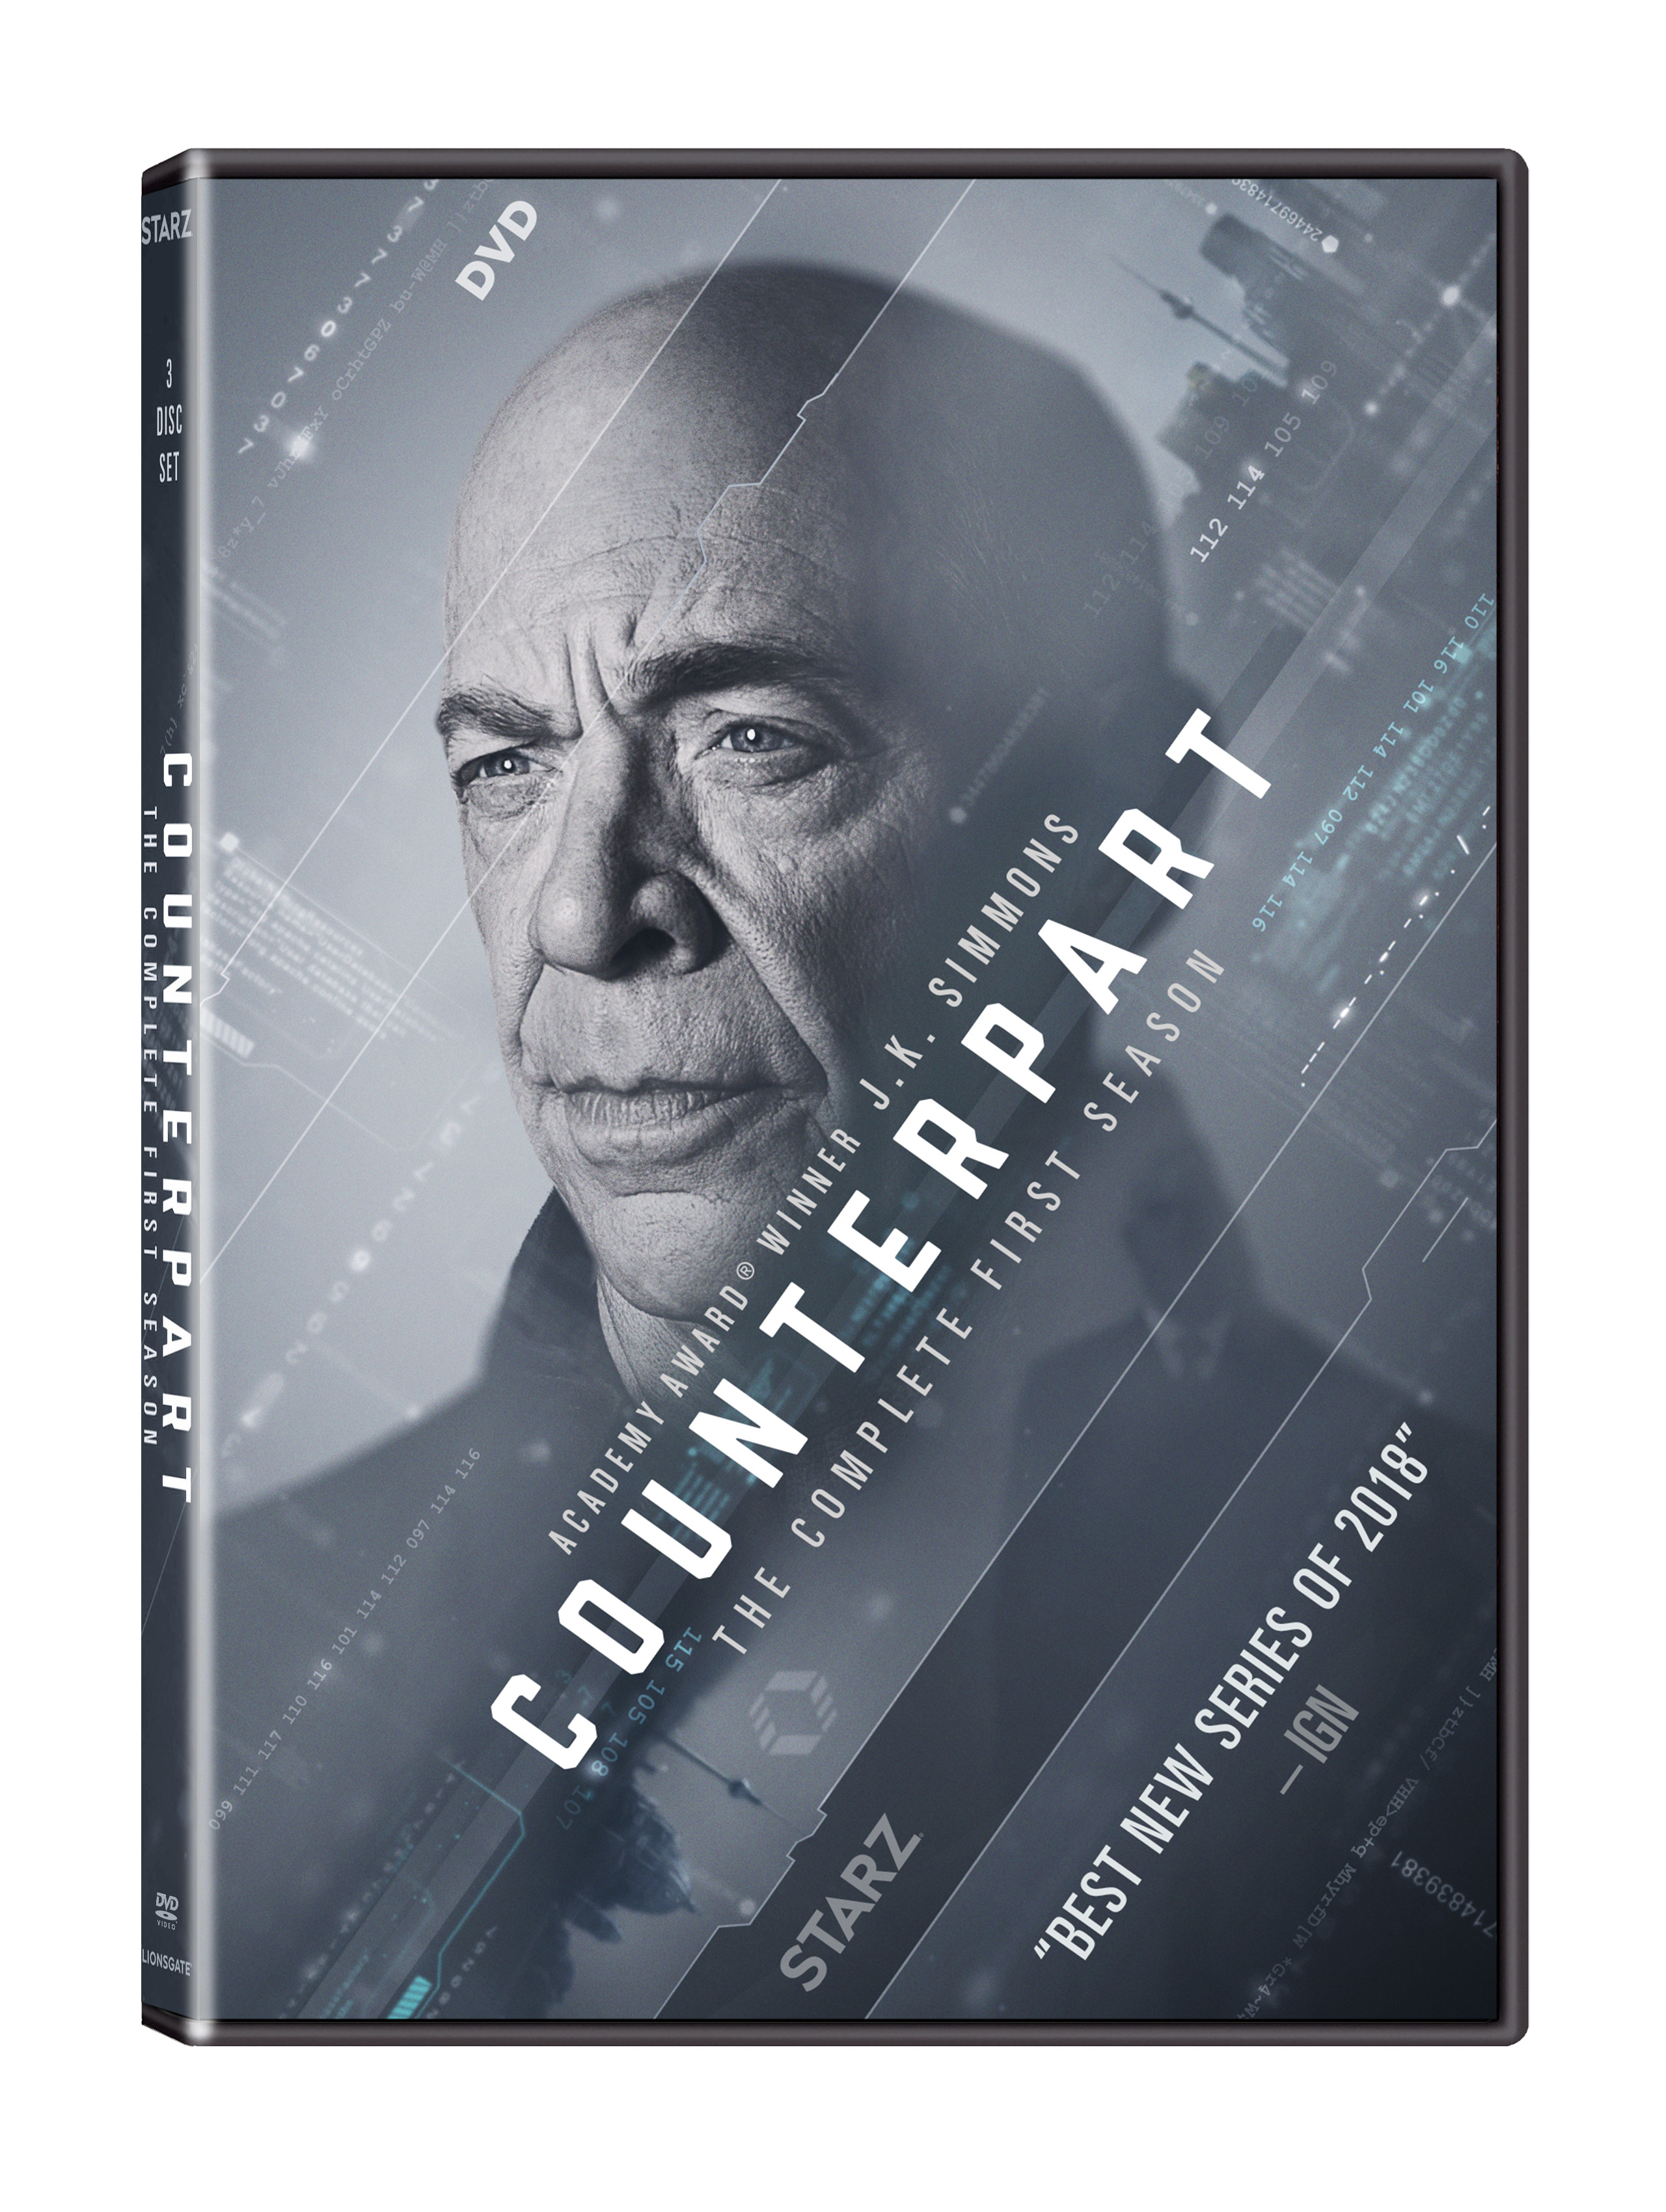 Counterpart: The Complete First Season DVD cover (Liosngate Home Entertainment)